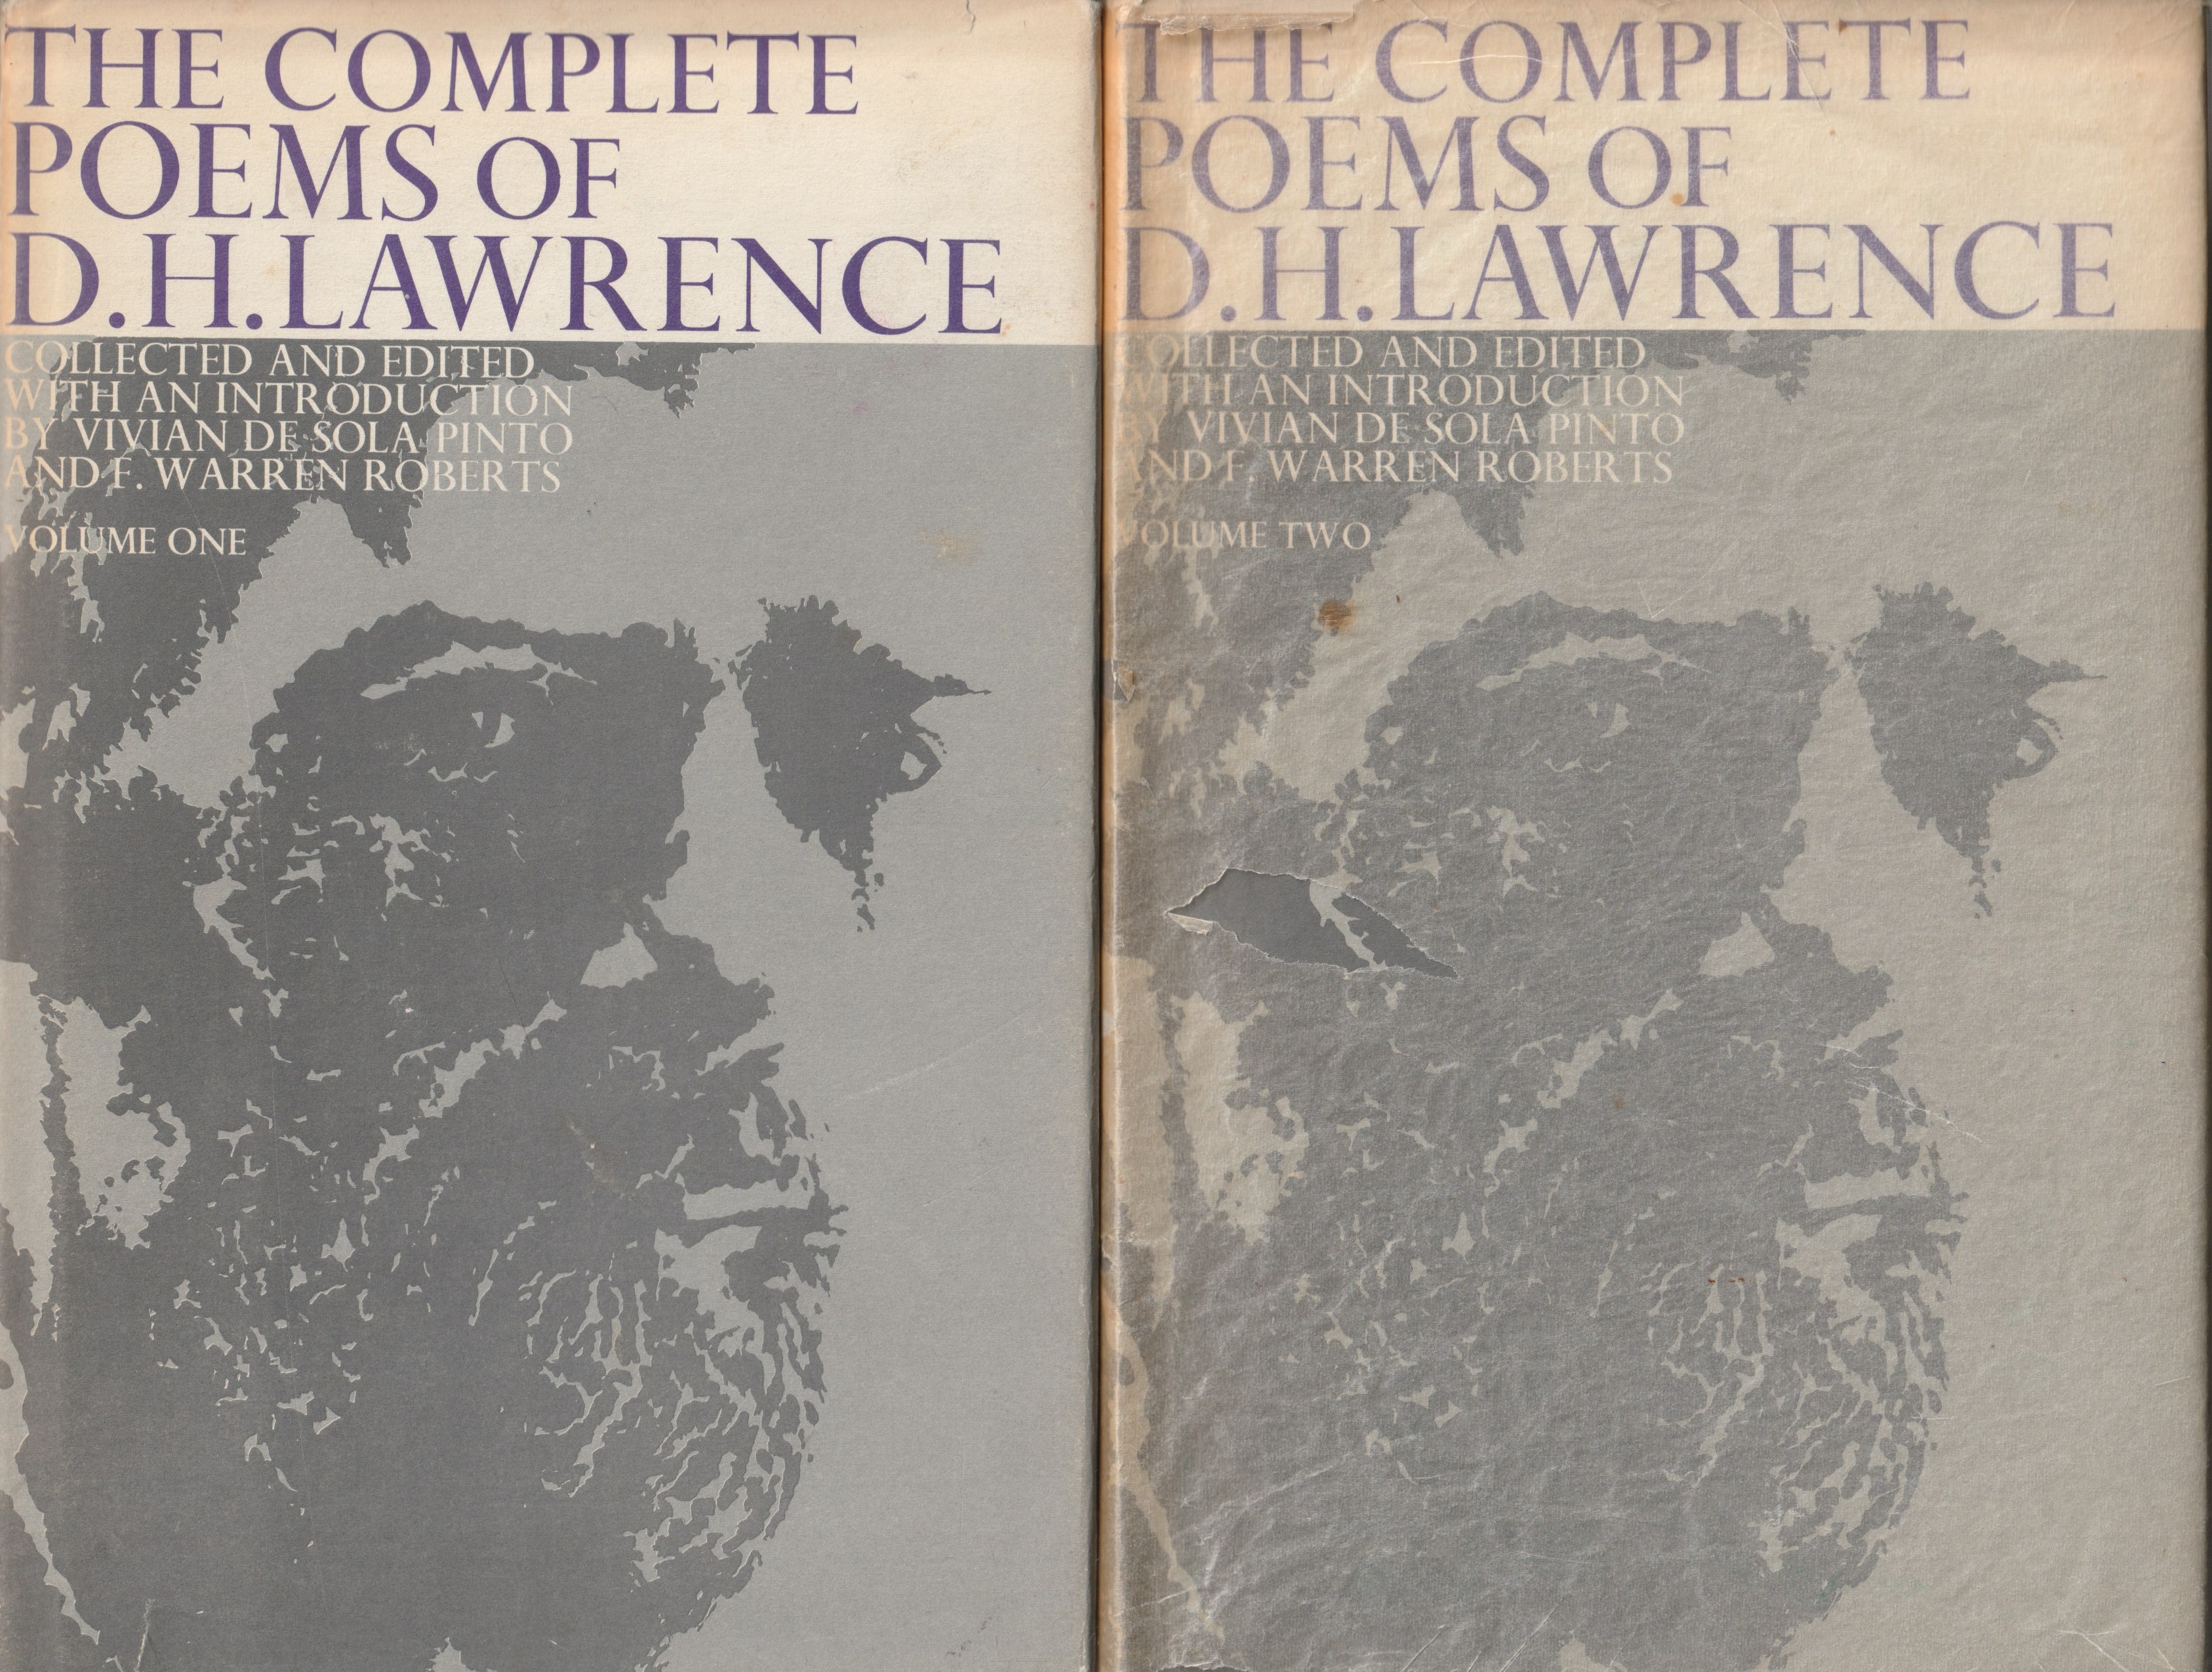 The complete poems of D.H. Lawrence.